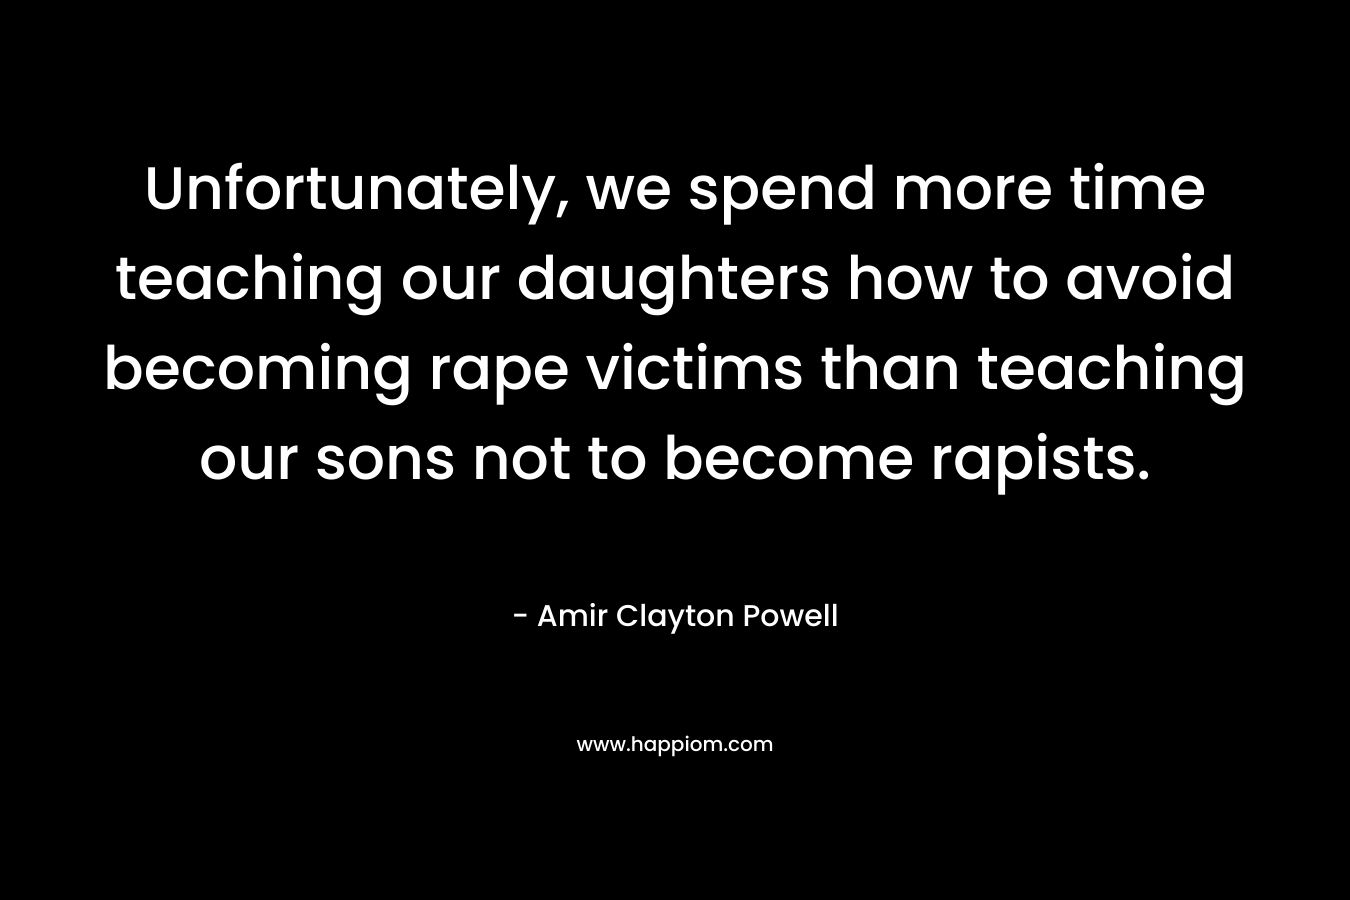 Unfortunately, we spend more time teaching our daughters how to avoid becoming rape victims than teaching our sons not to become rapists. – Amir Clayton Powell